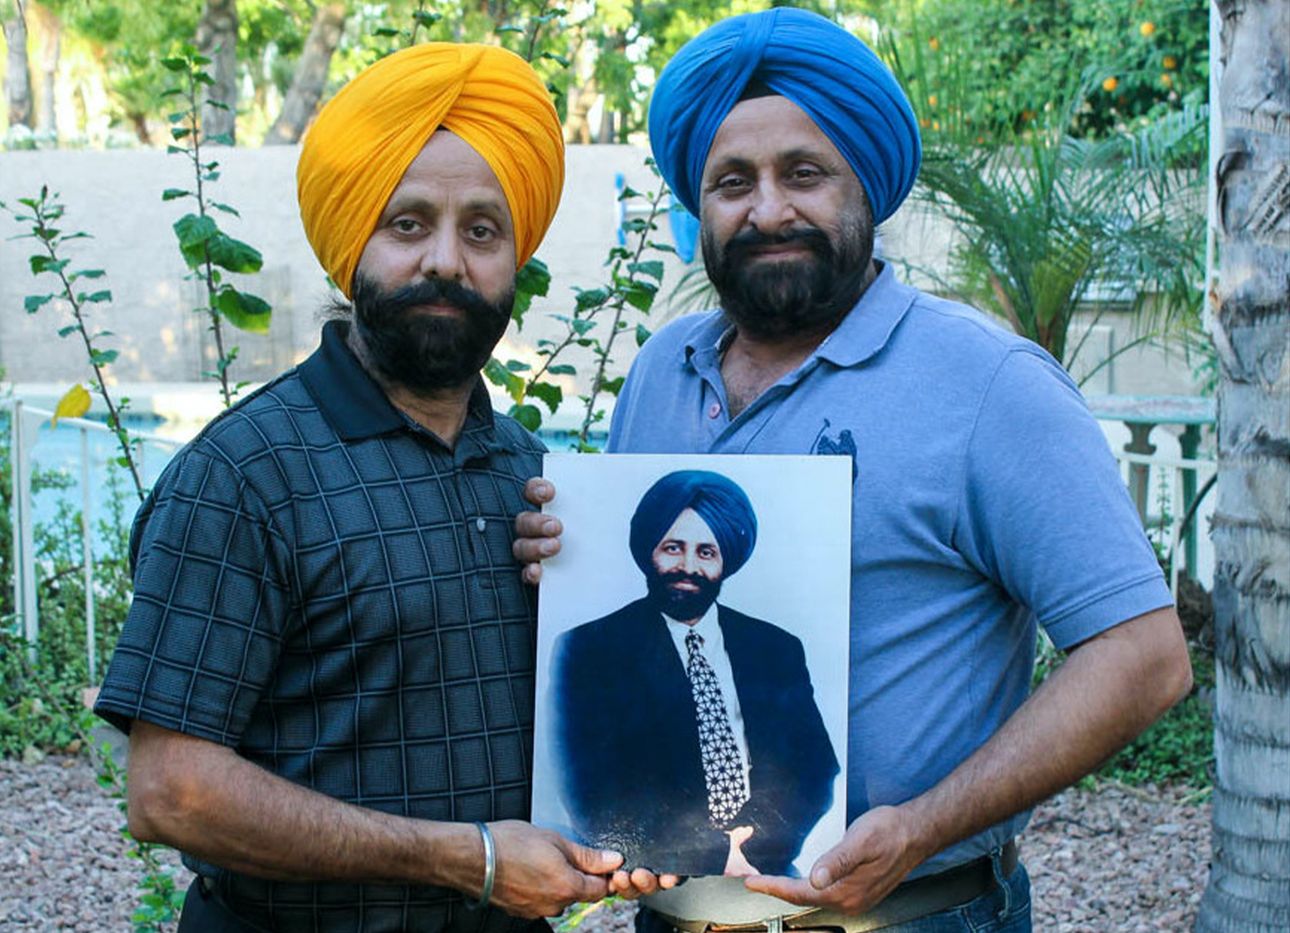 Rana and Harjit Sodhi holding a photo of their late brother, Balbir Singh Sodi, who died on 9/11